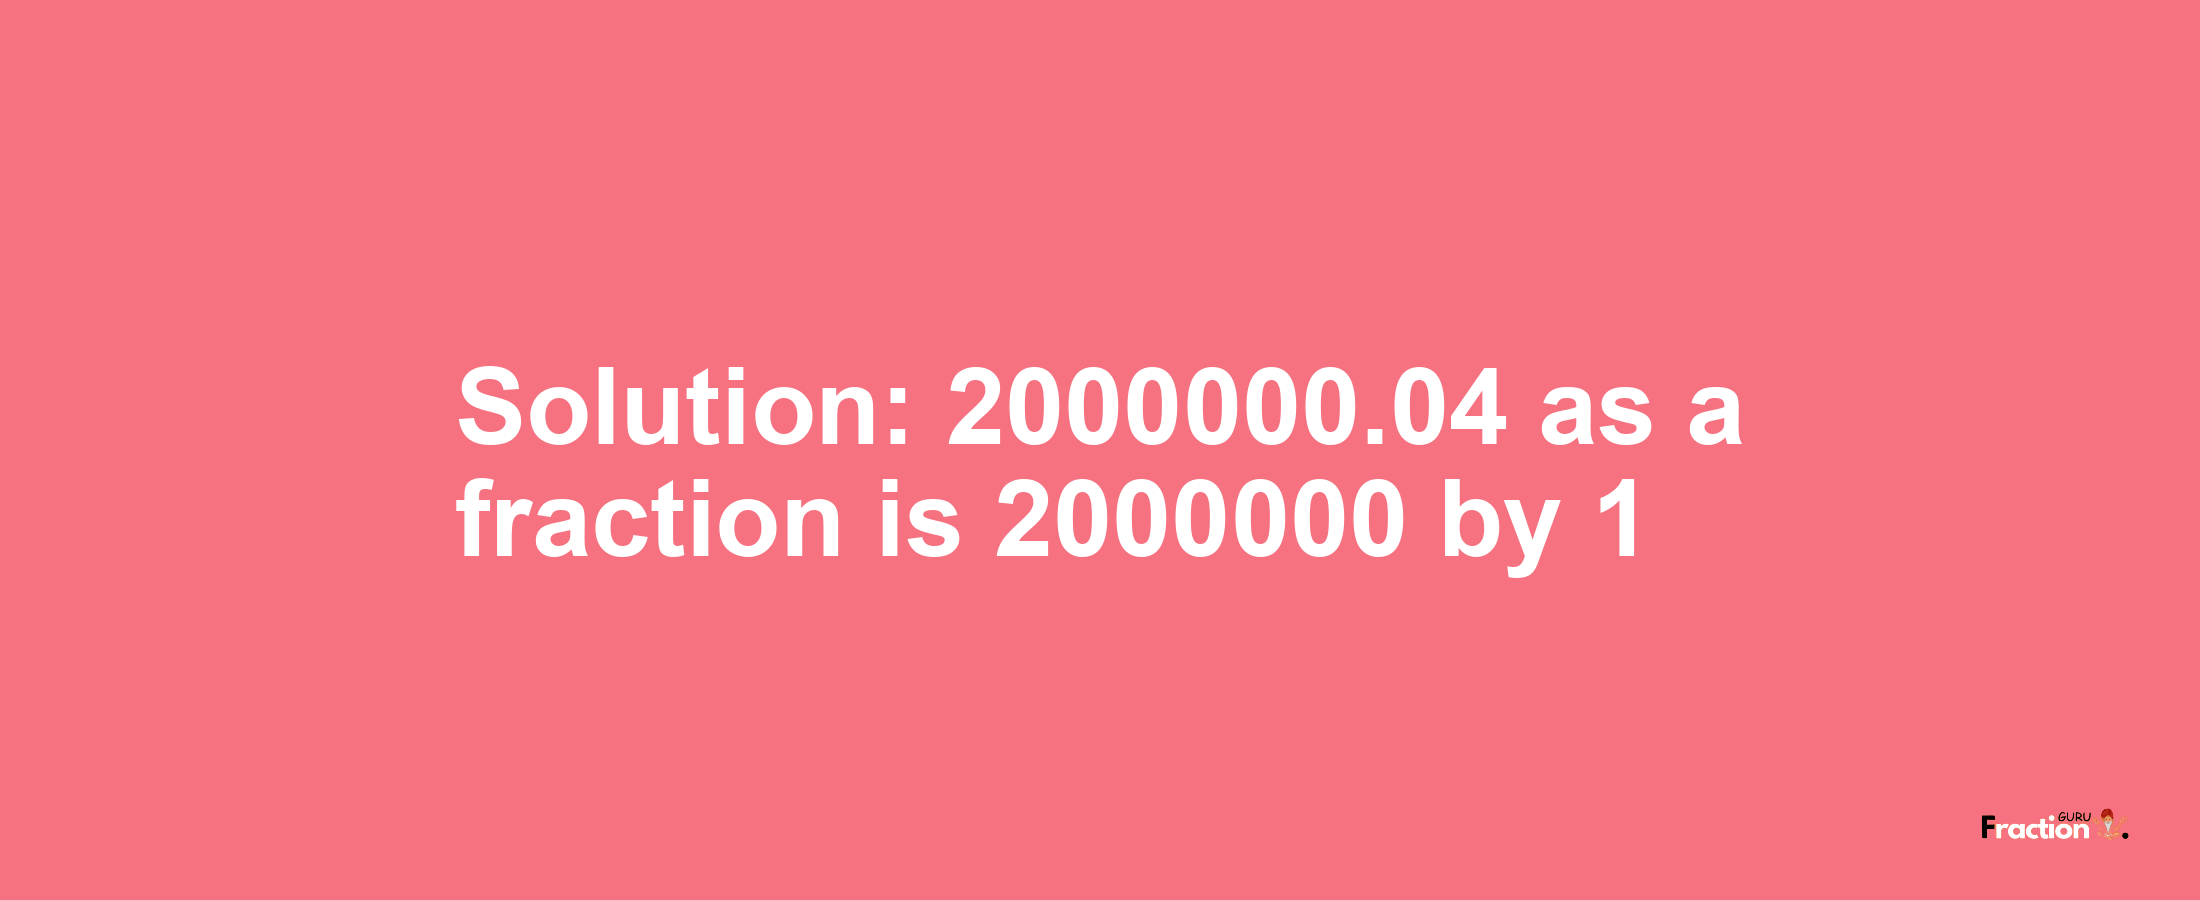 Solution:2000000.04 as a fraction is 2000000/1